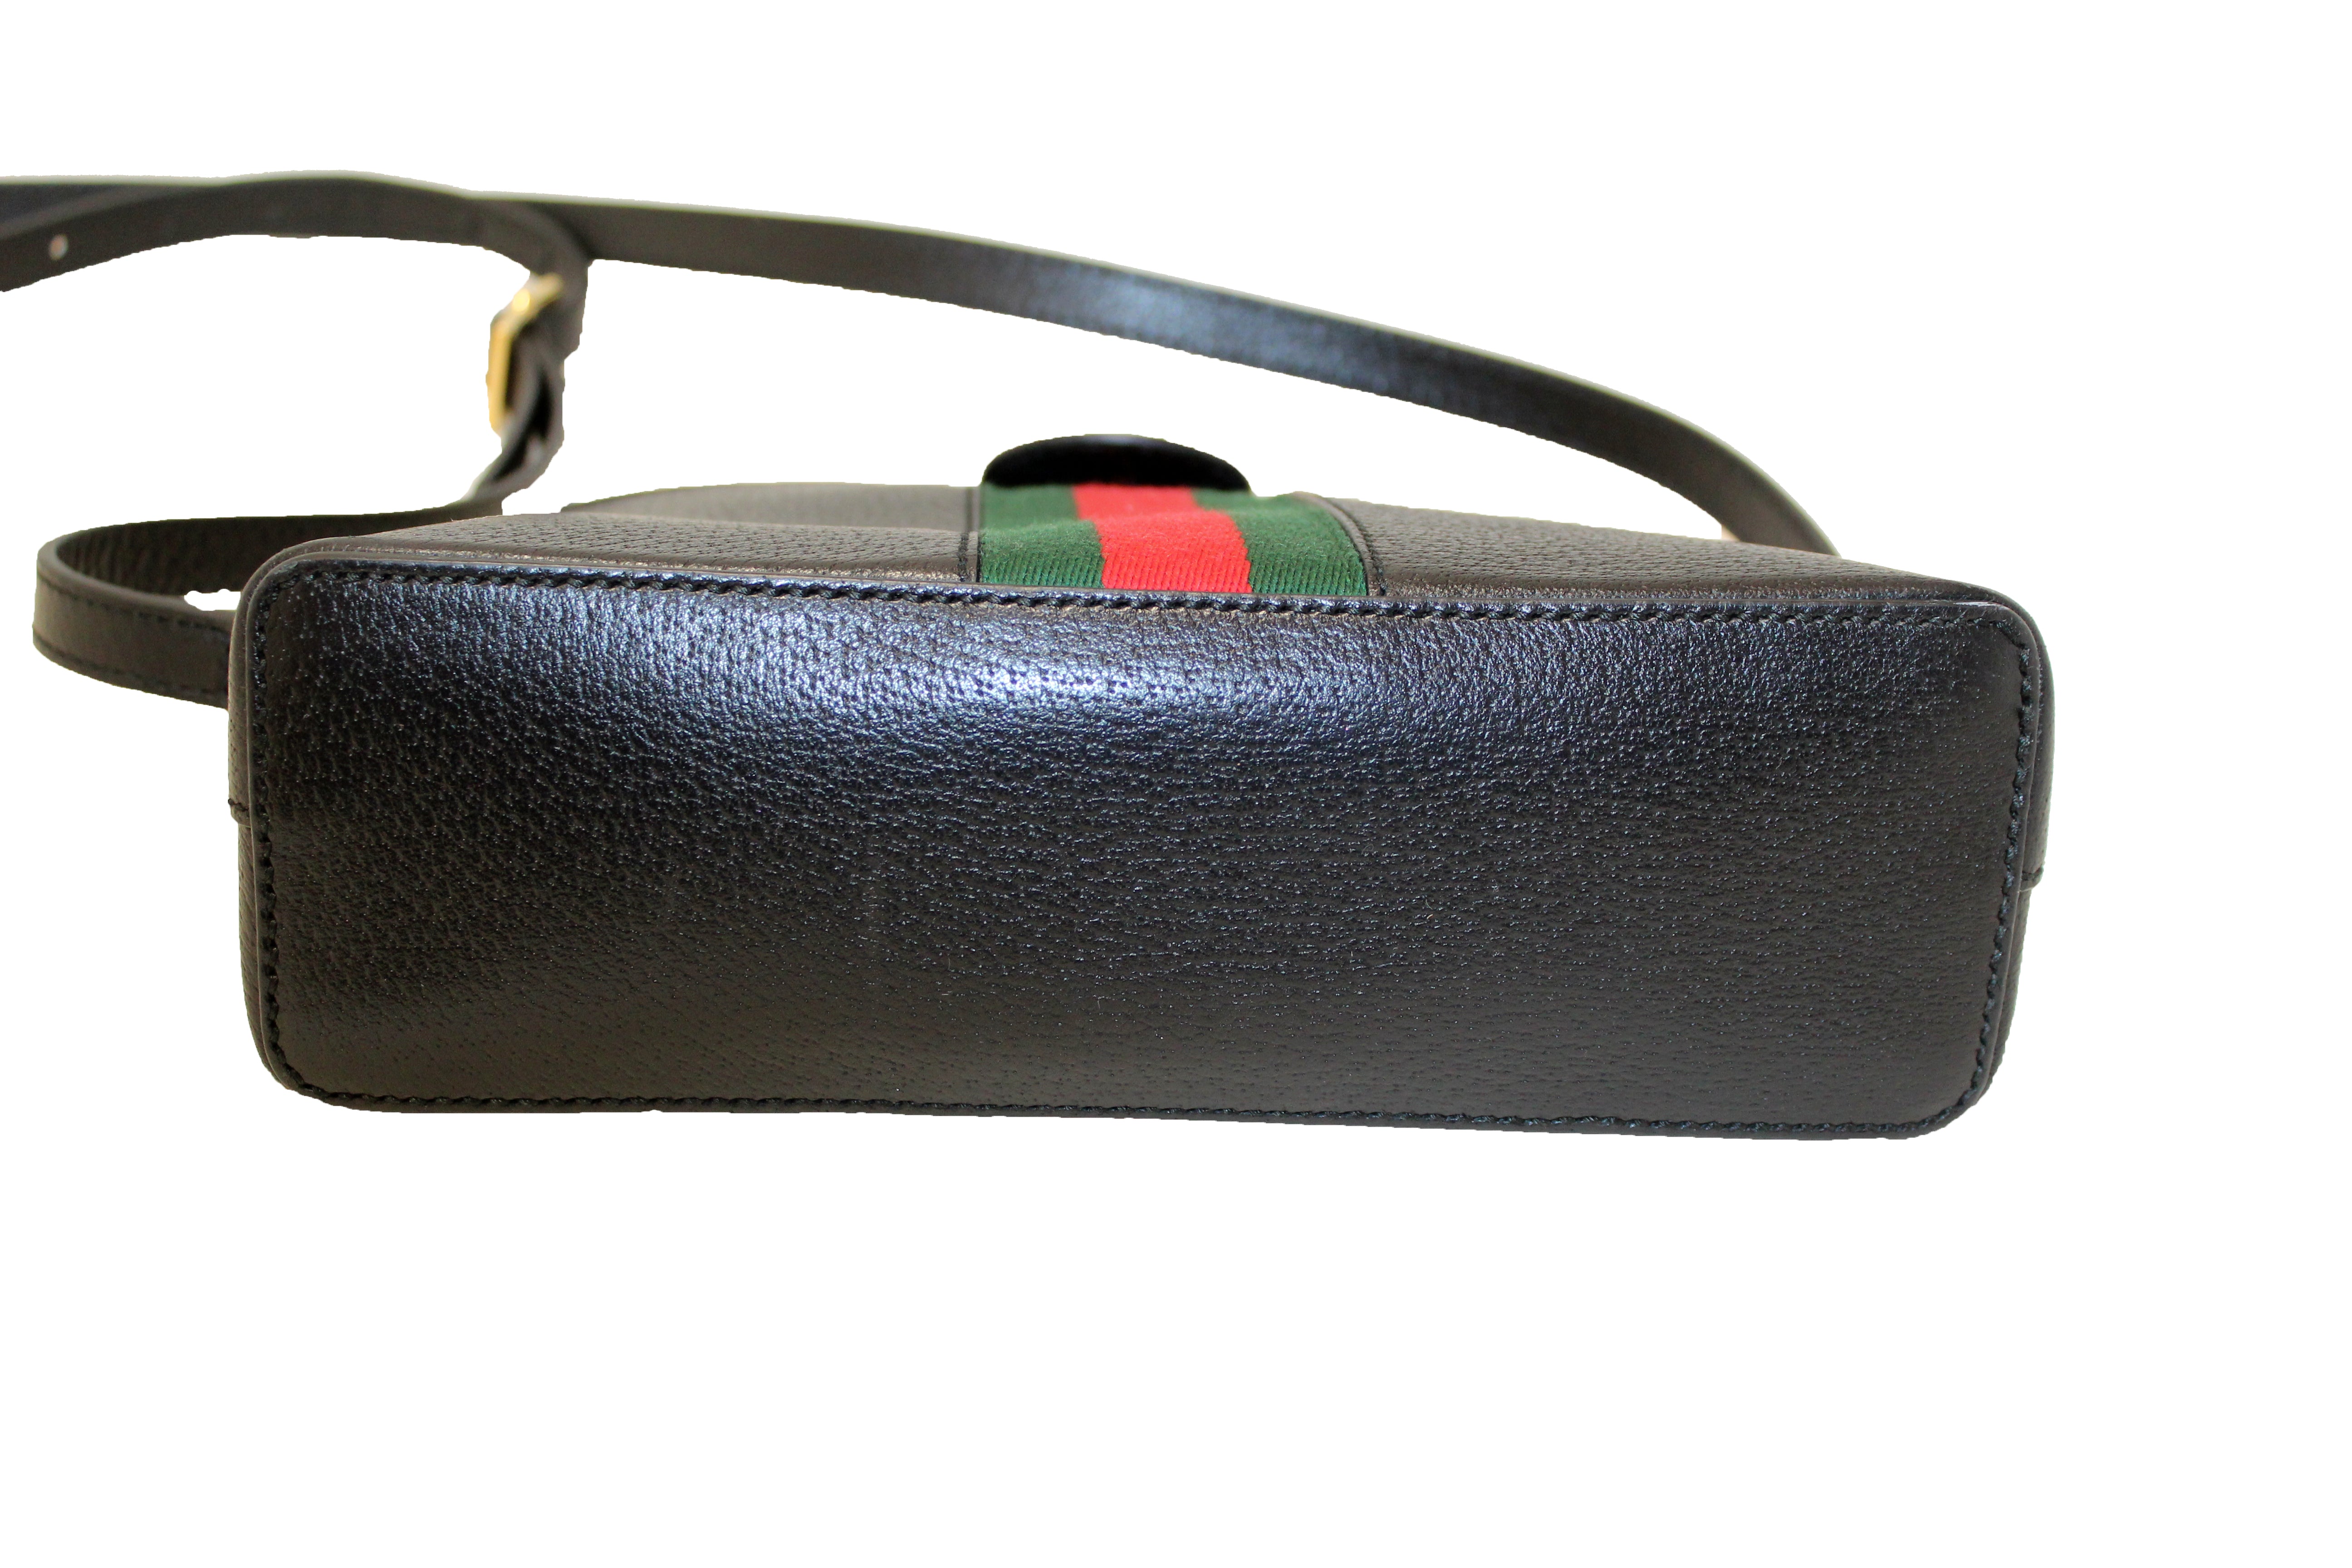 GUCCI Ophidia GG Small Shoulder Bag in Black Leather